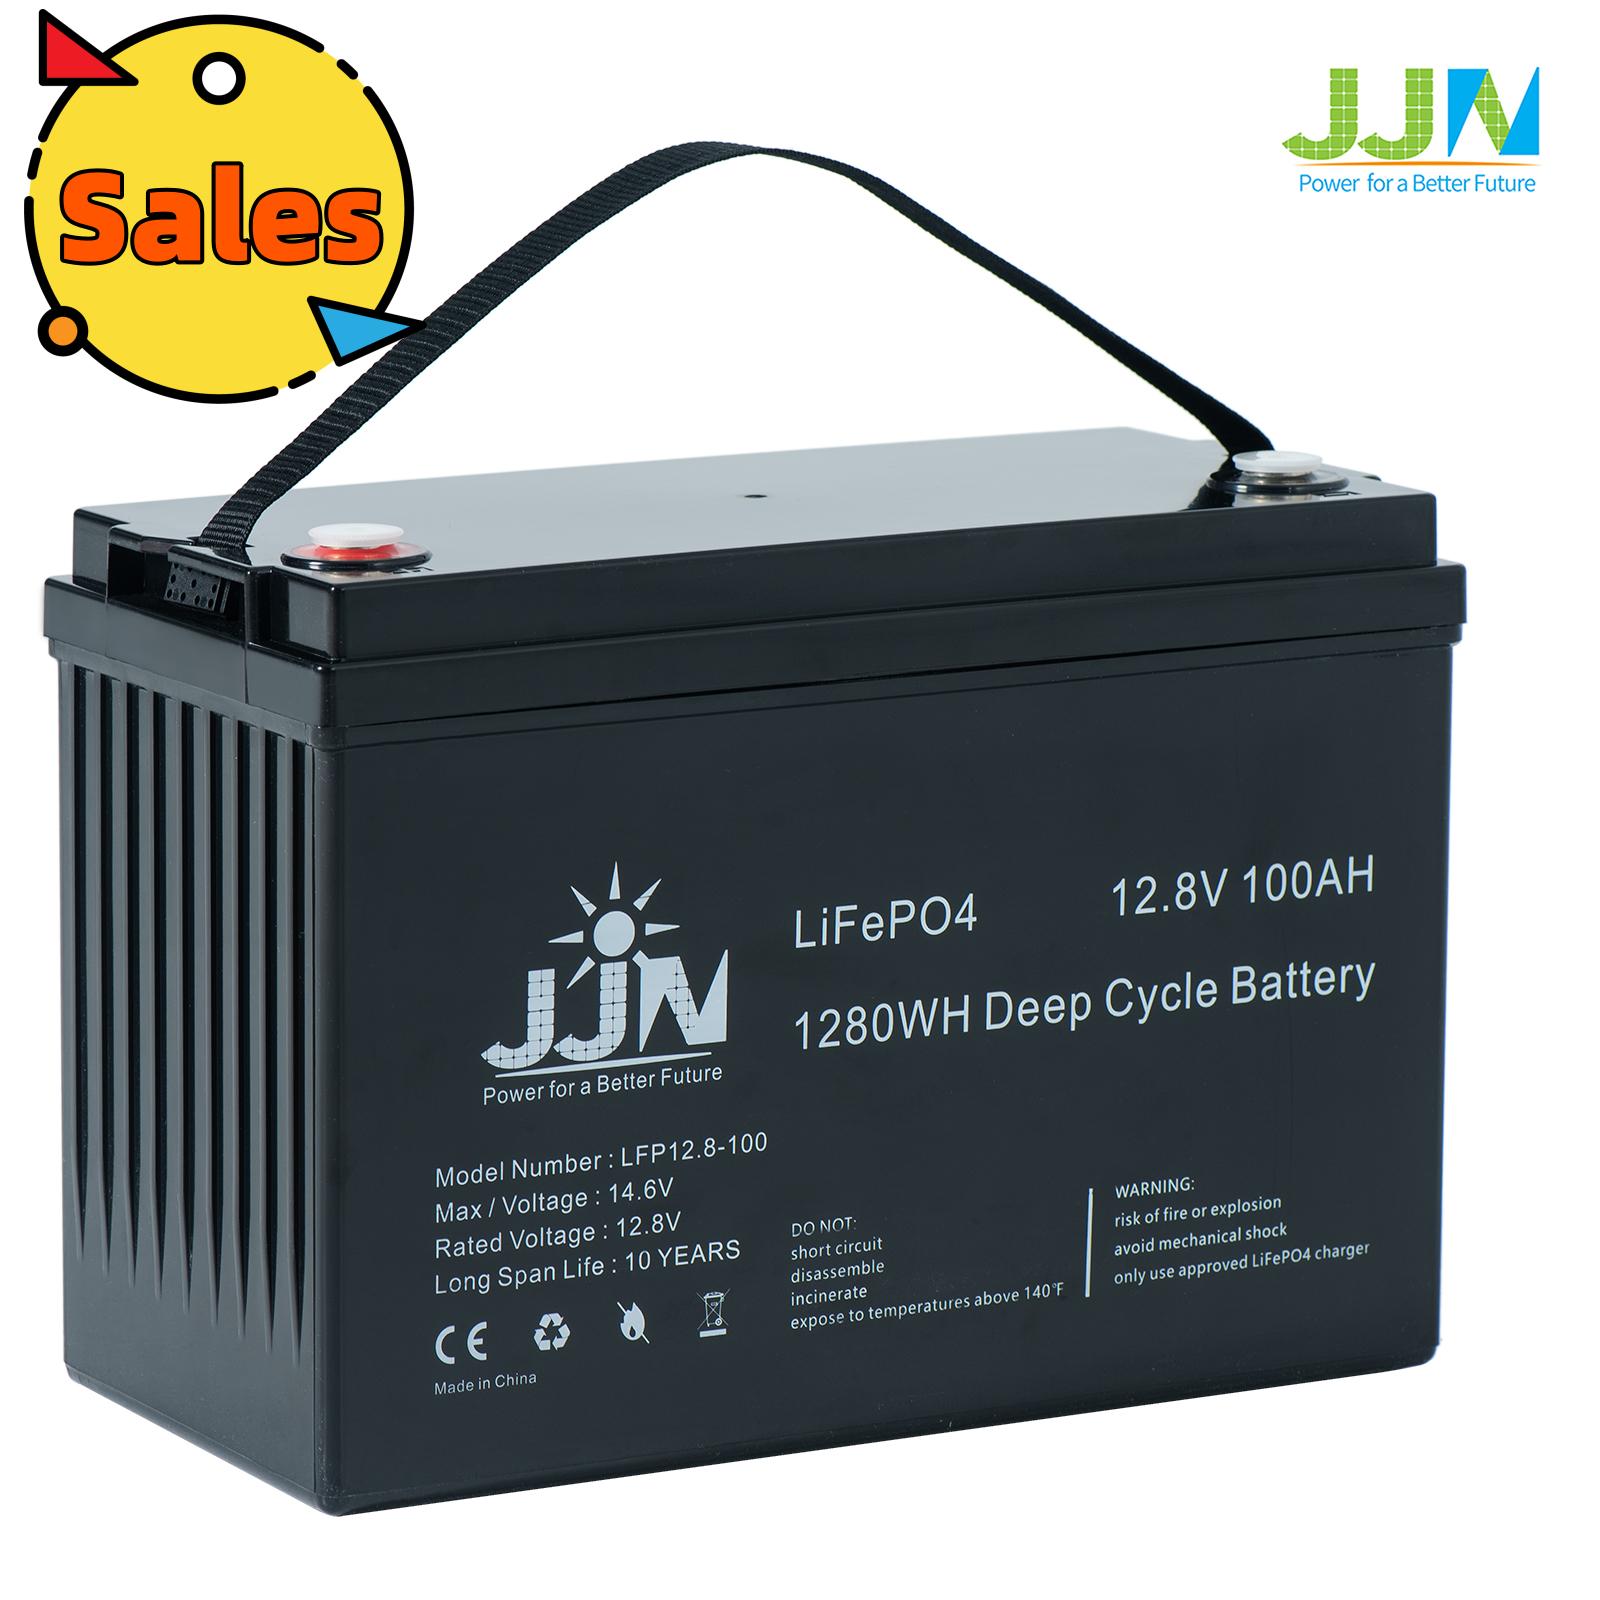 How to Care For a LifePo4 Lithium Battery